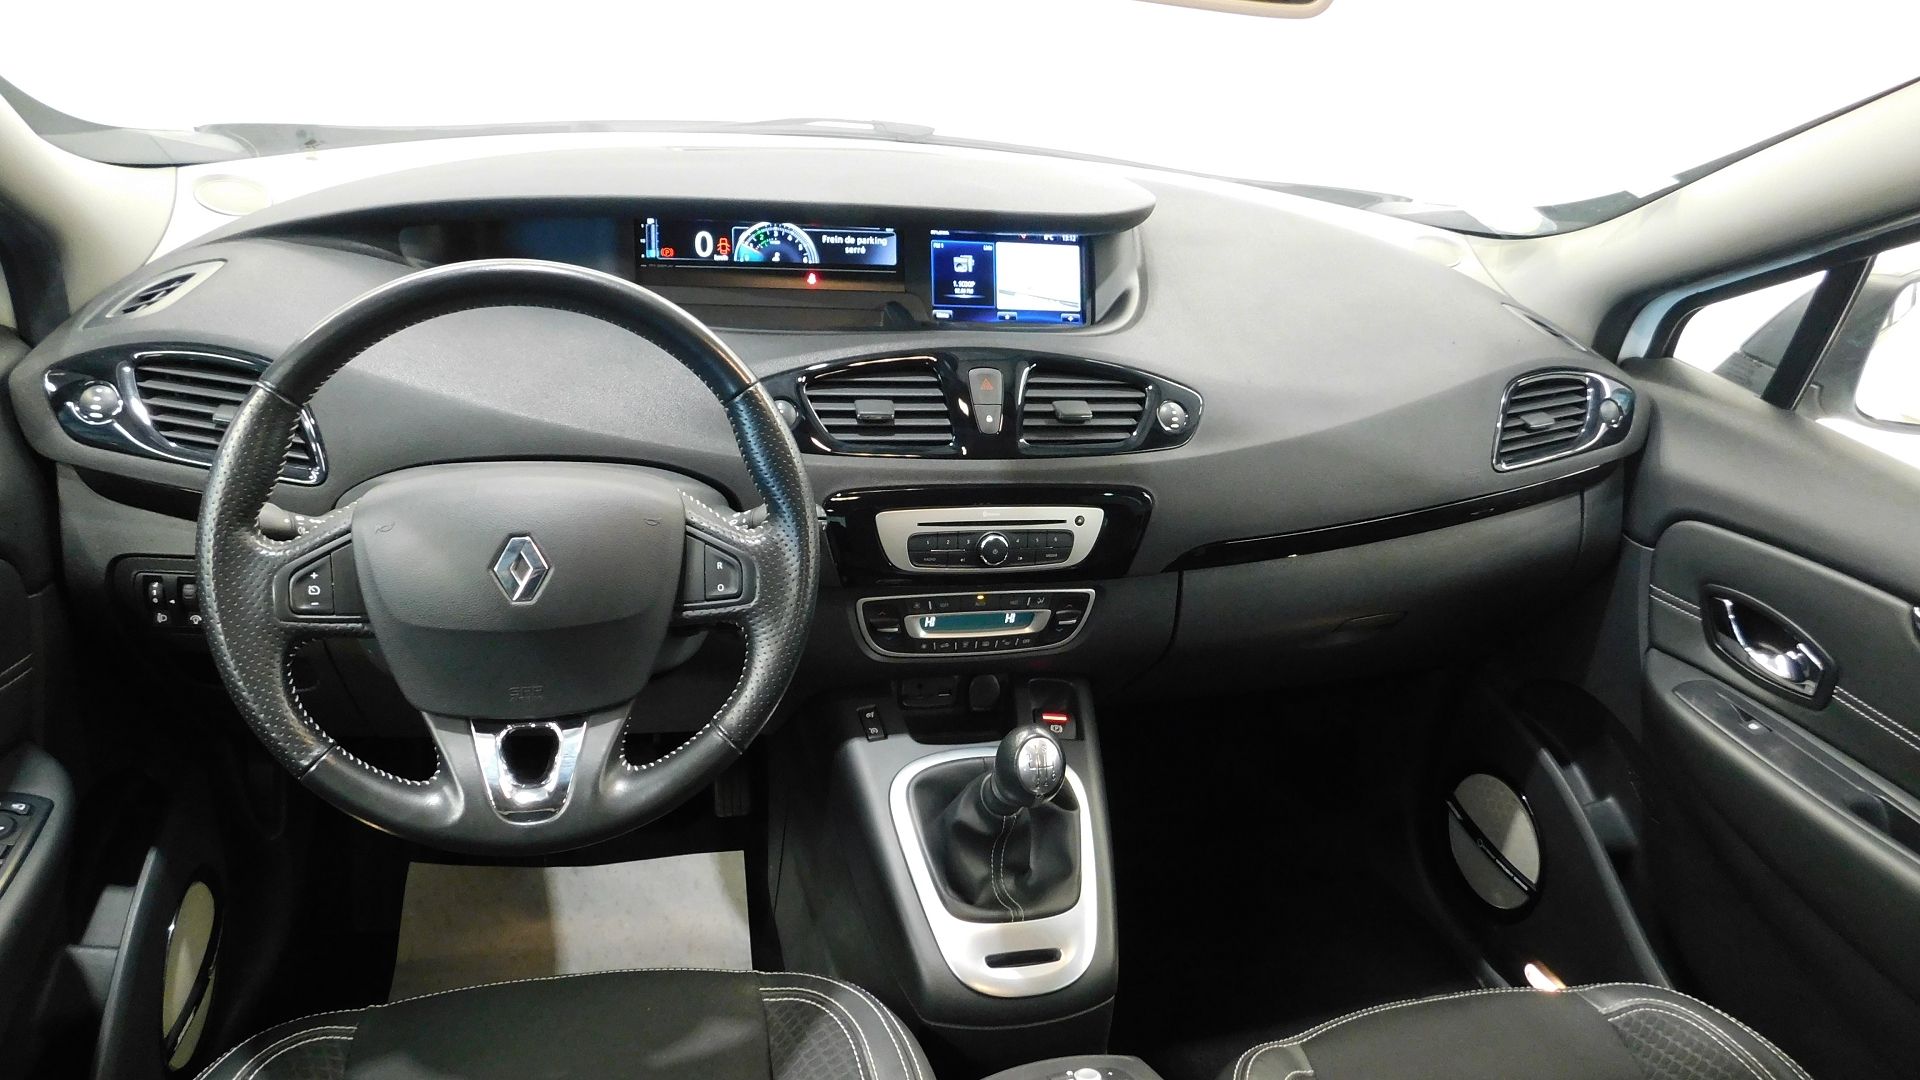 RENAULT GRAND SCENIC 3 1.5 DCI 110CH ENERGY BOSE ECO² EURO6 7 PLACES 2015